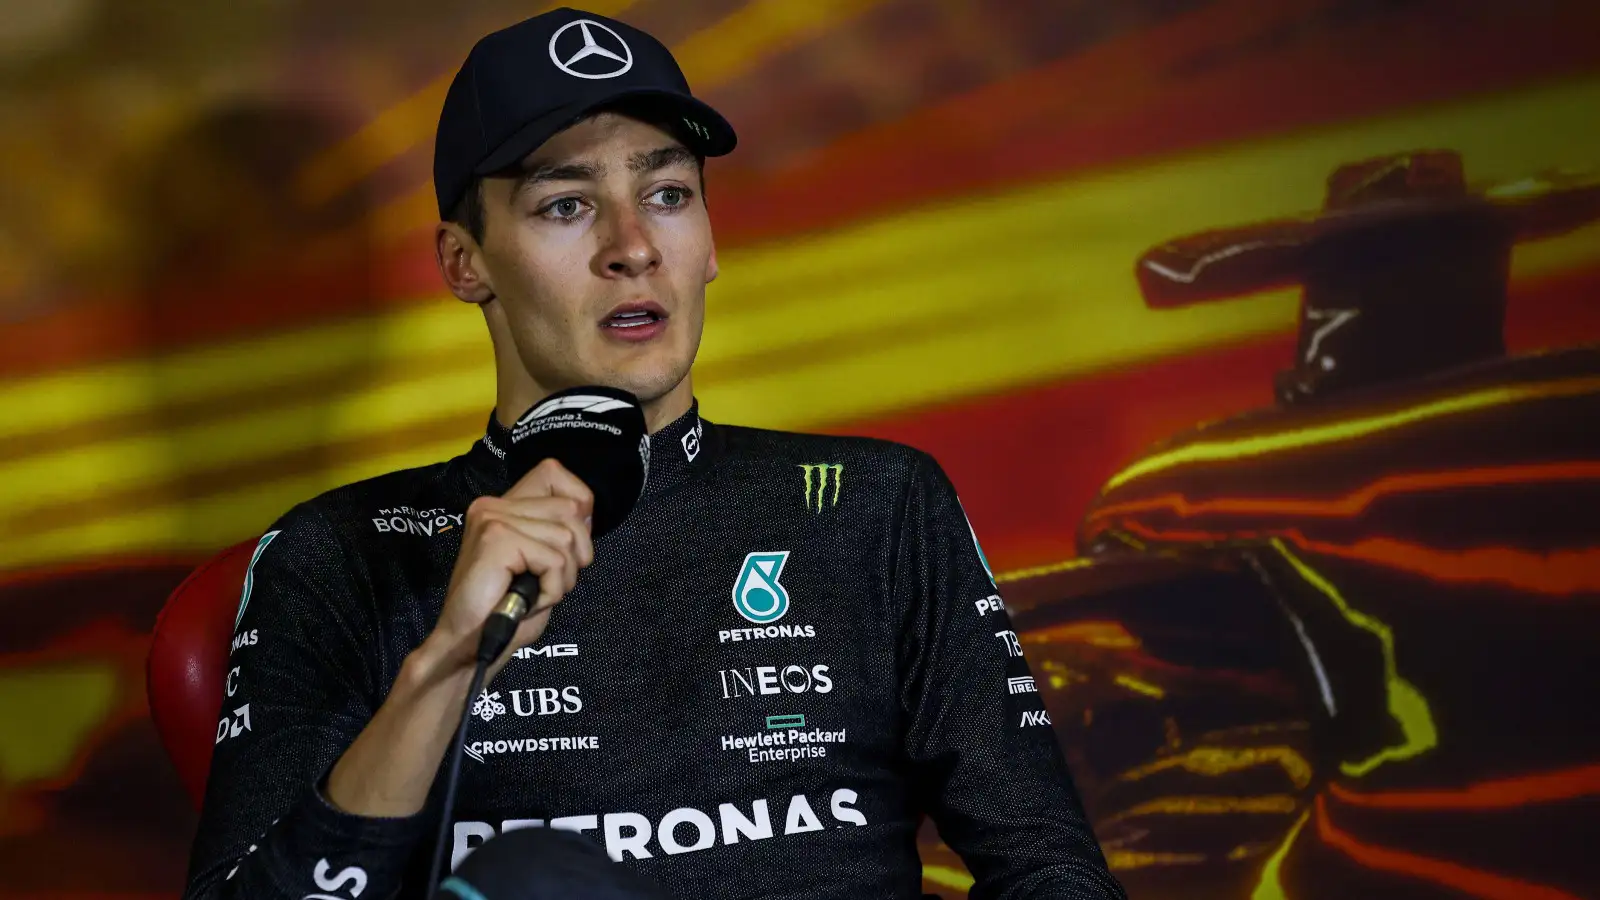 Mercedes' George Russell addresses the media over the Spanish Grand Prix weekend. Barcelona, May 2022.